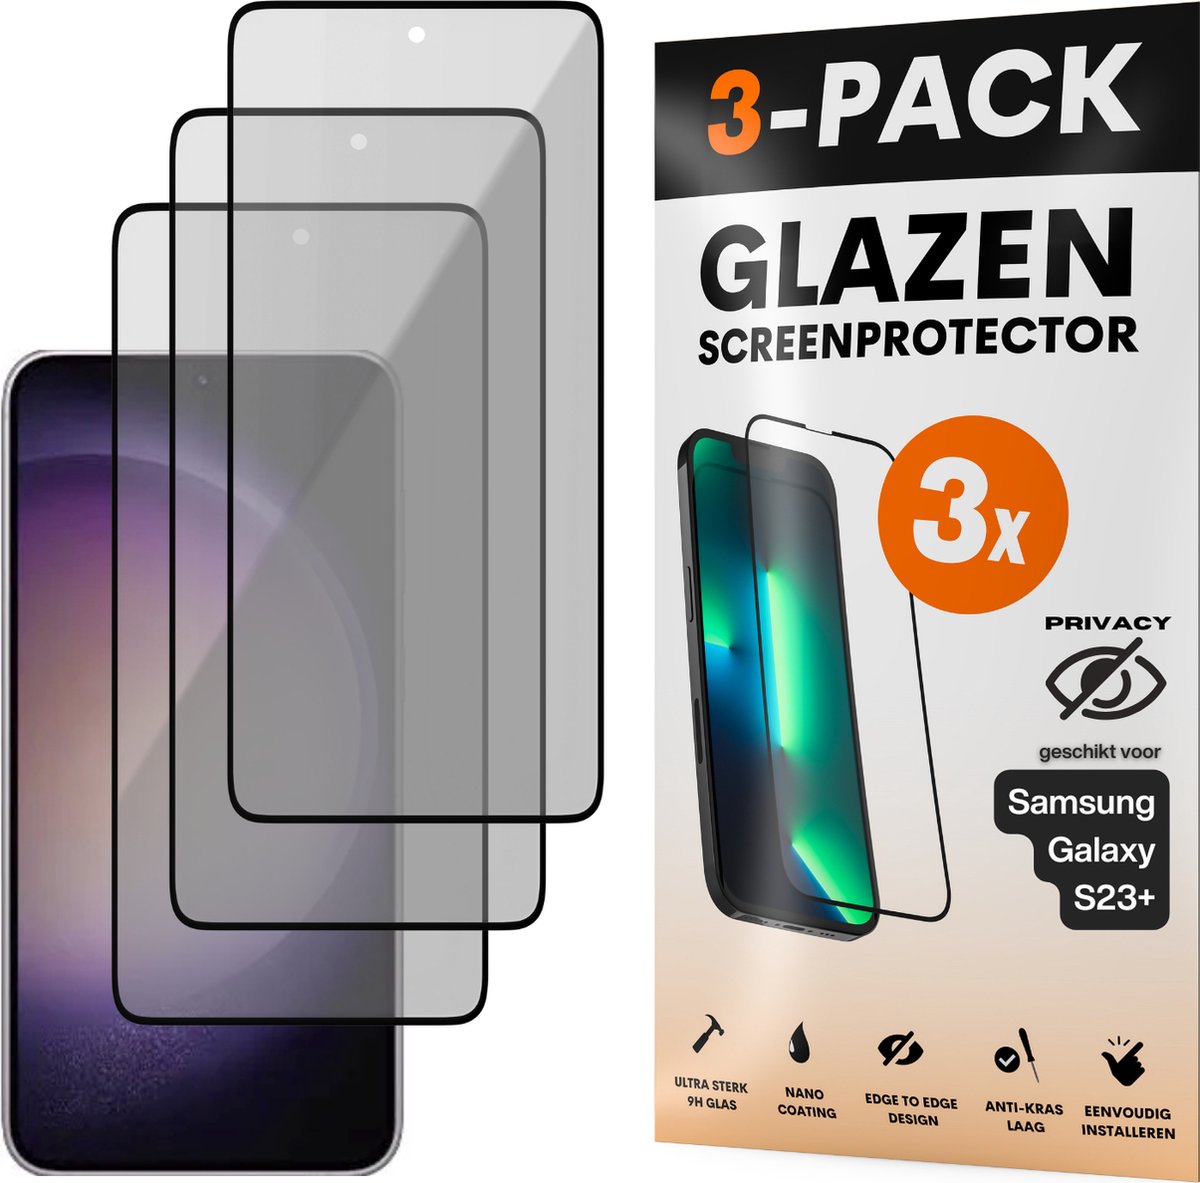 Privacy Screenprotector - Geschikt voor Samsung Galaxy S23+ - Gehard Glas - Full Cover Tempered Privacy Glass - Case Friendly - 3 Pack